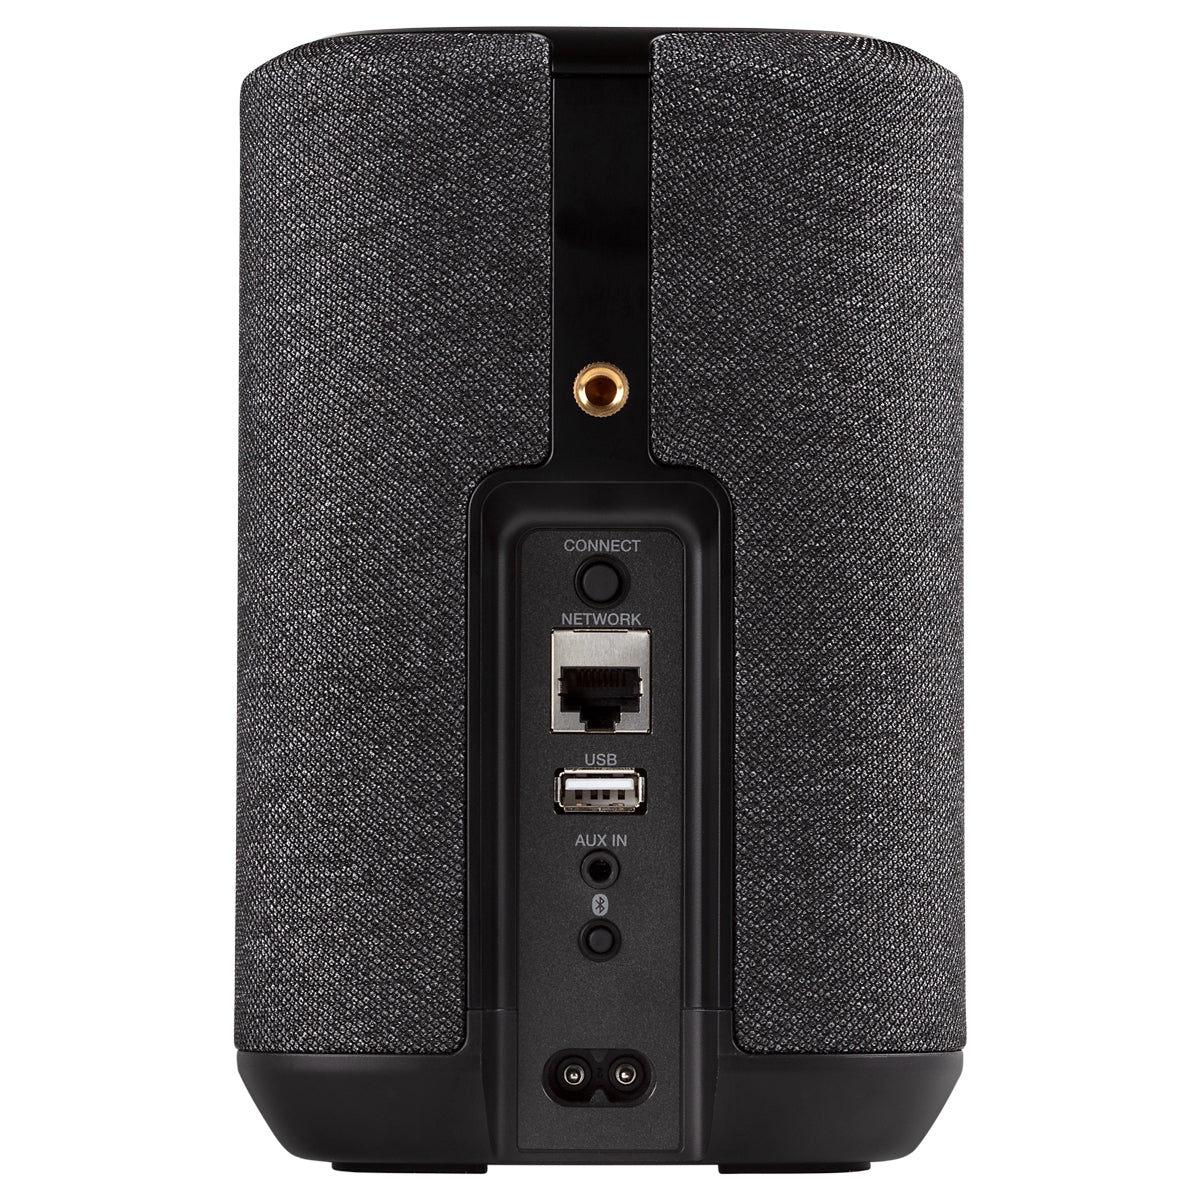 Denon Home 150 Wireless Speaker - Black (out of stock) - The Audio Experts